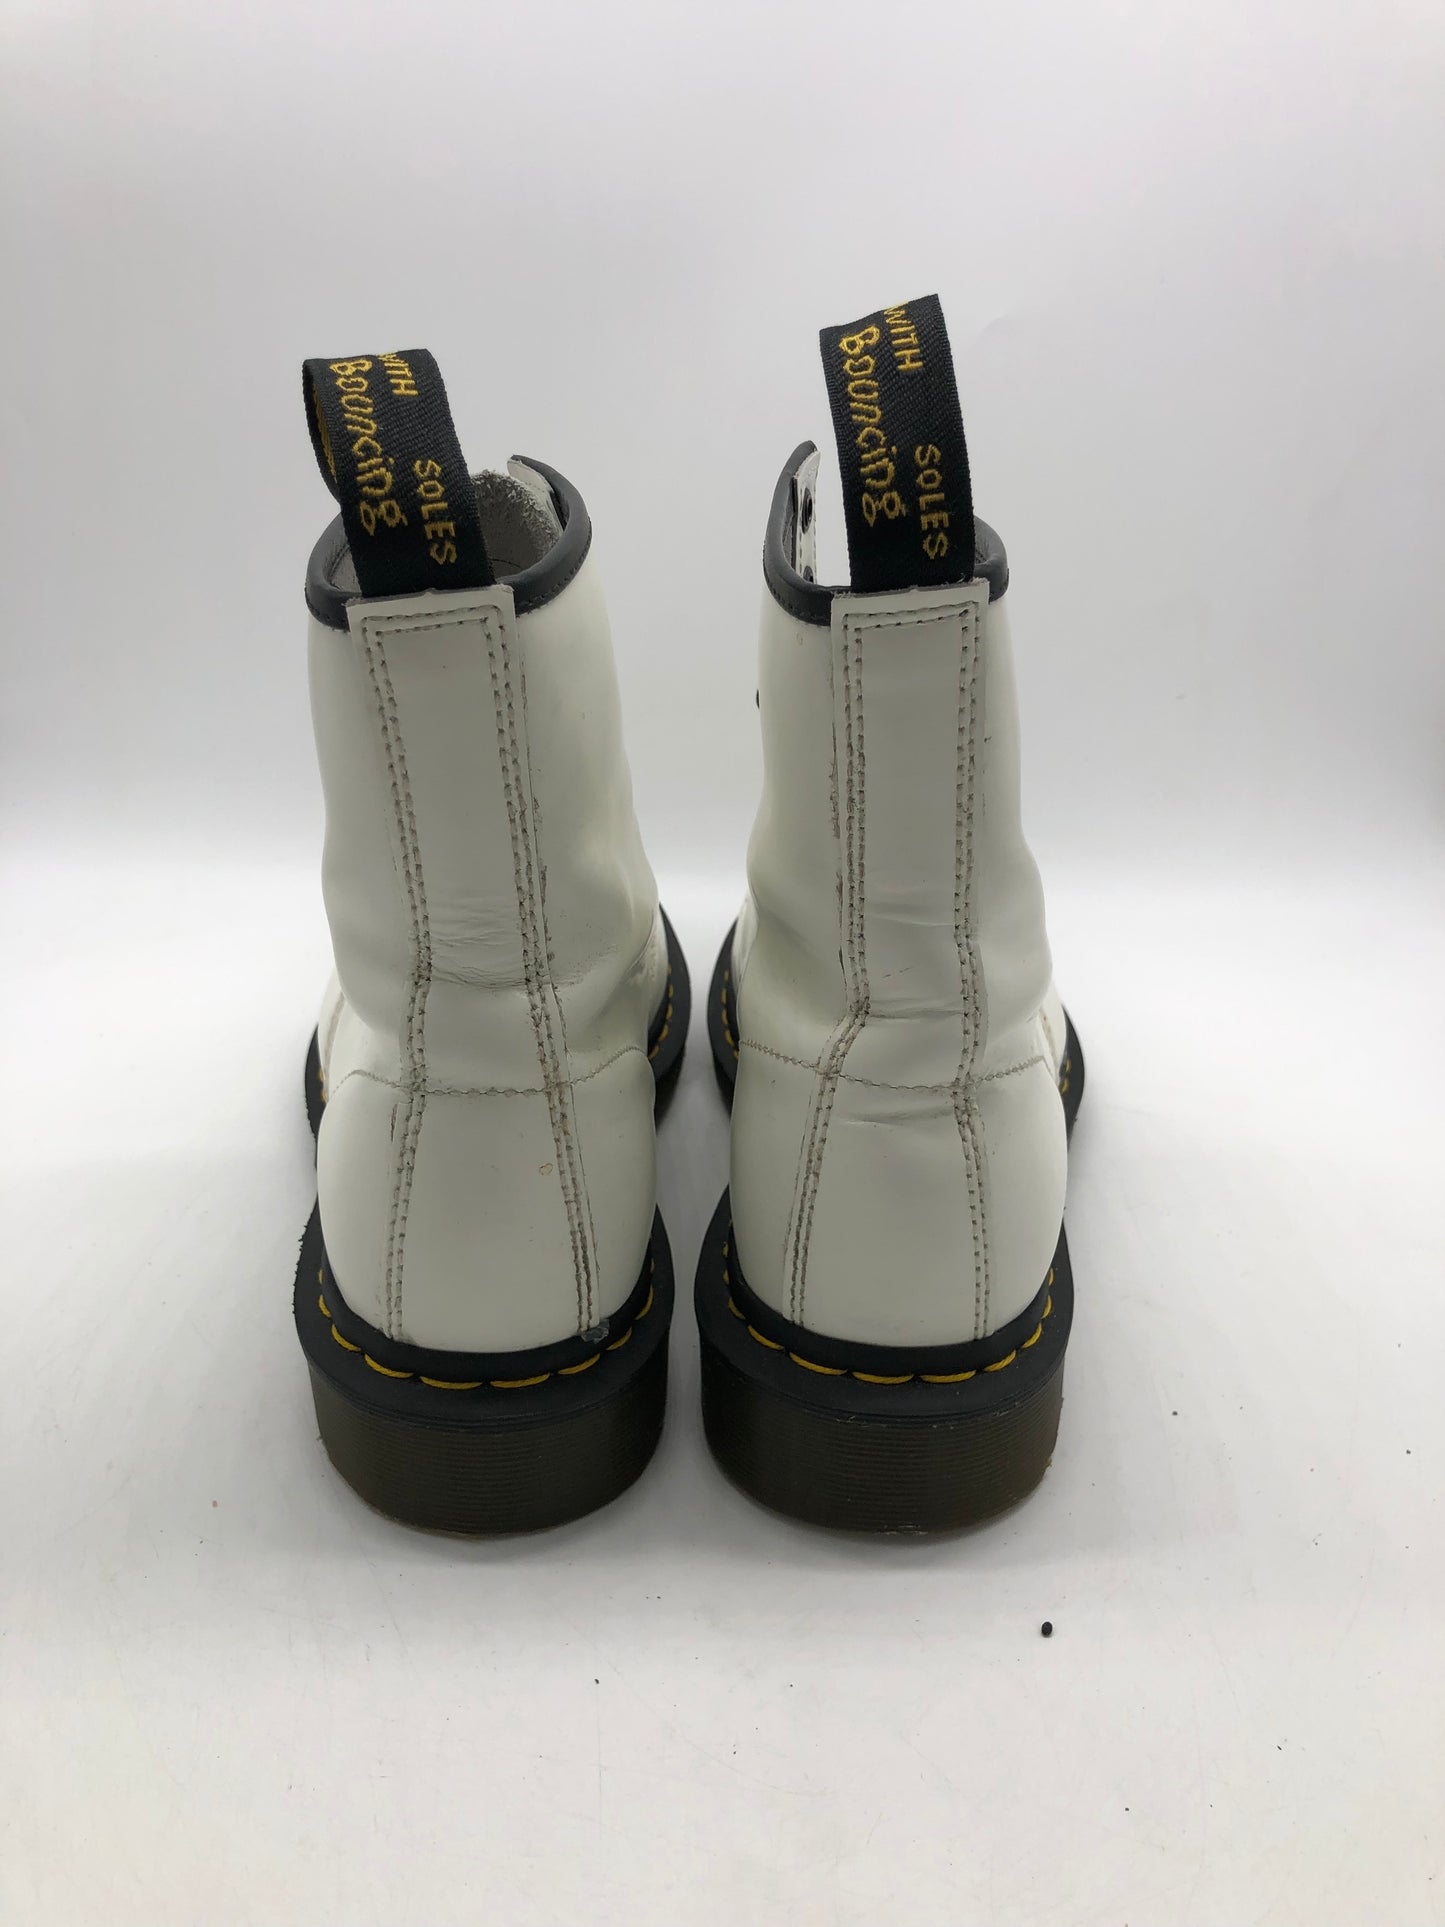 Preowned Dr. Martens White Patent Leather Laced Boot Sz 9M/10.5W